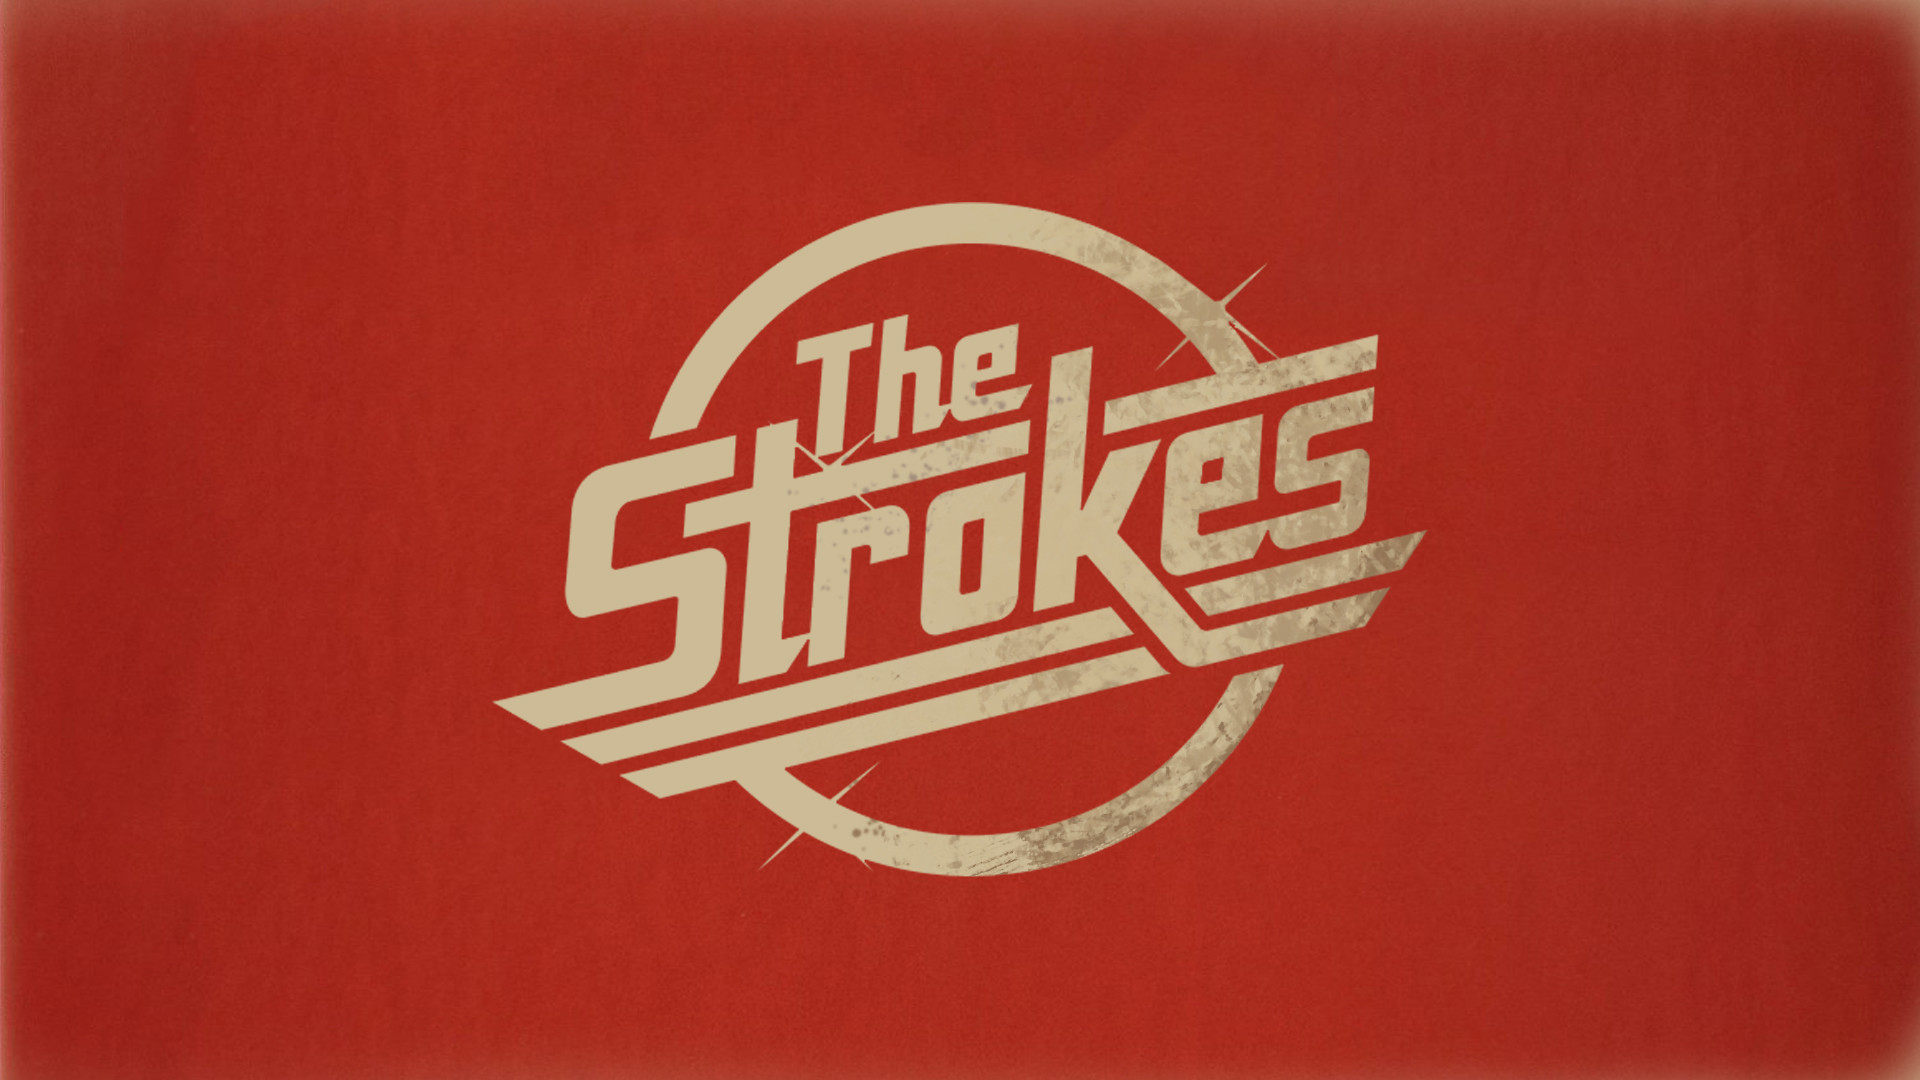 1920x1080 The Strokes Wallpapers, The Strokes Images (3548593) Free Download by  Melodie Ricca